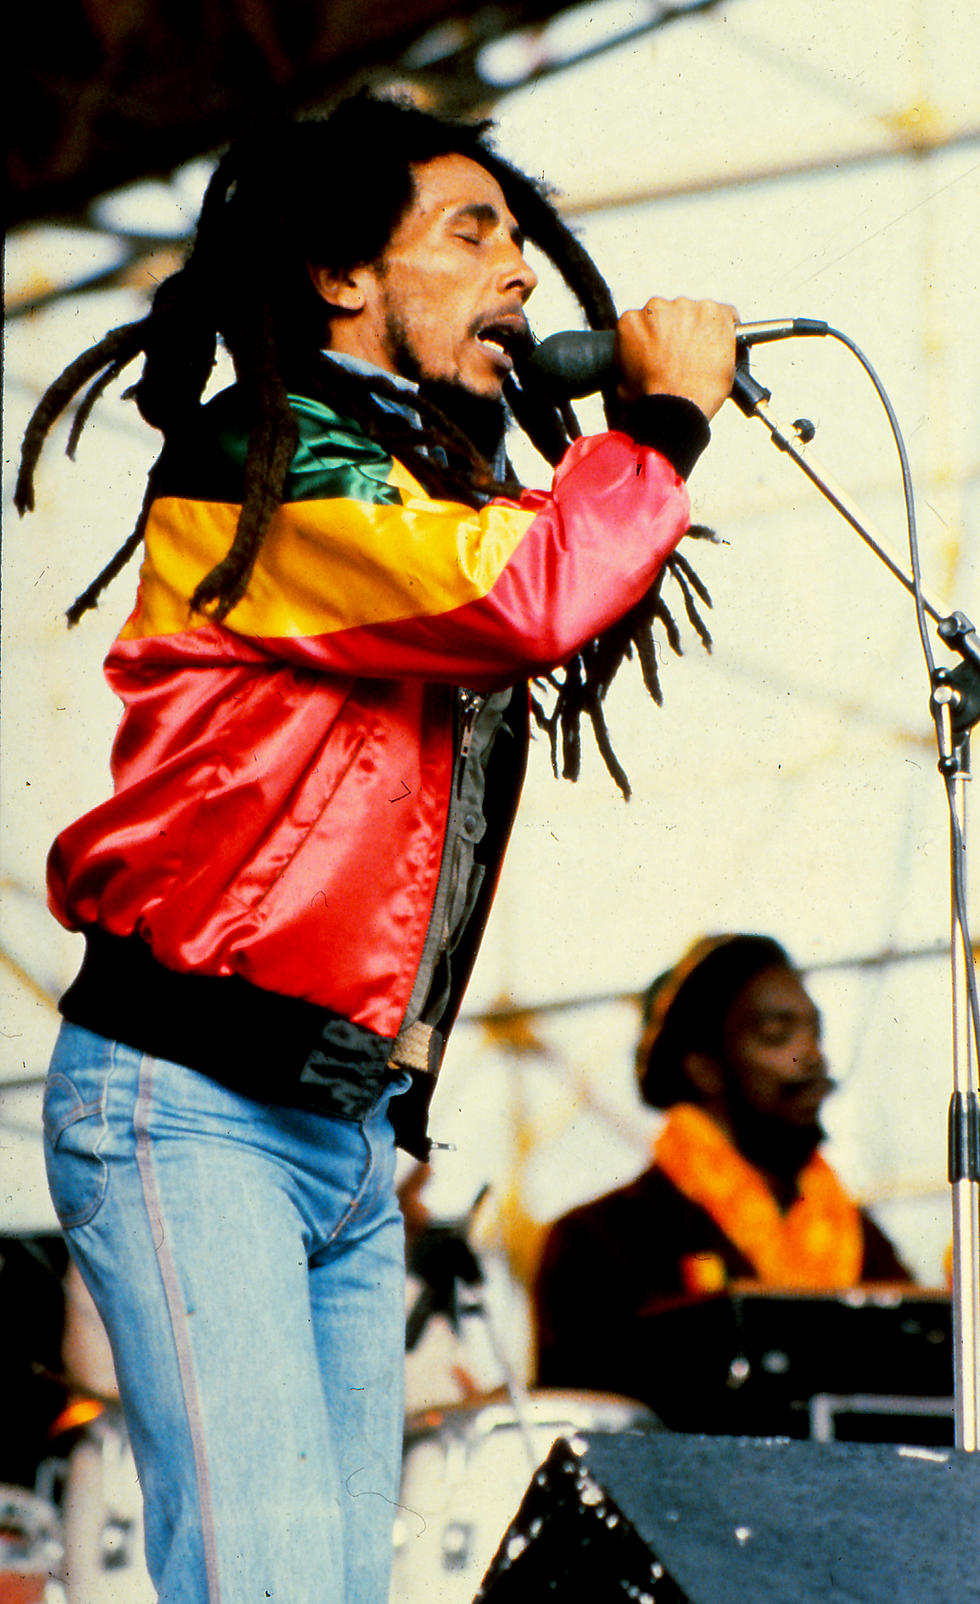 Bob Marley's Estate Settles With Louisiana Based Chicken Chain